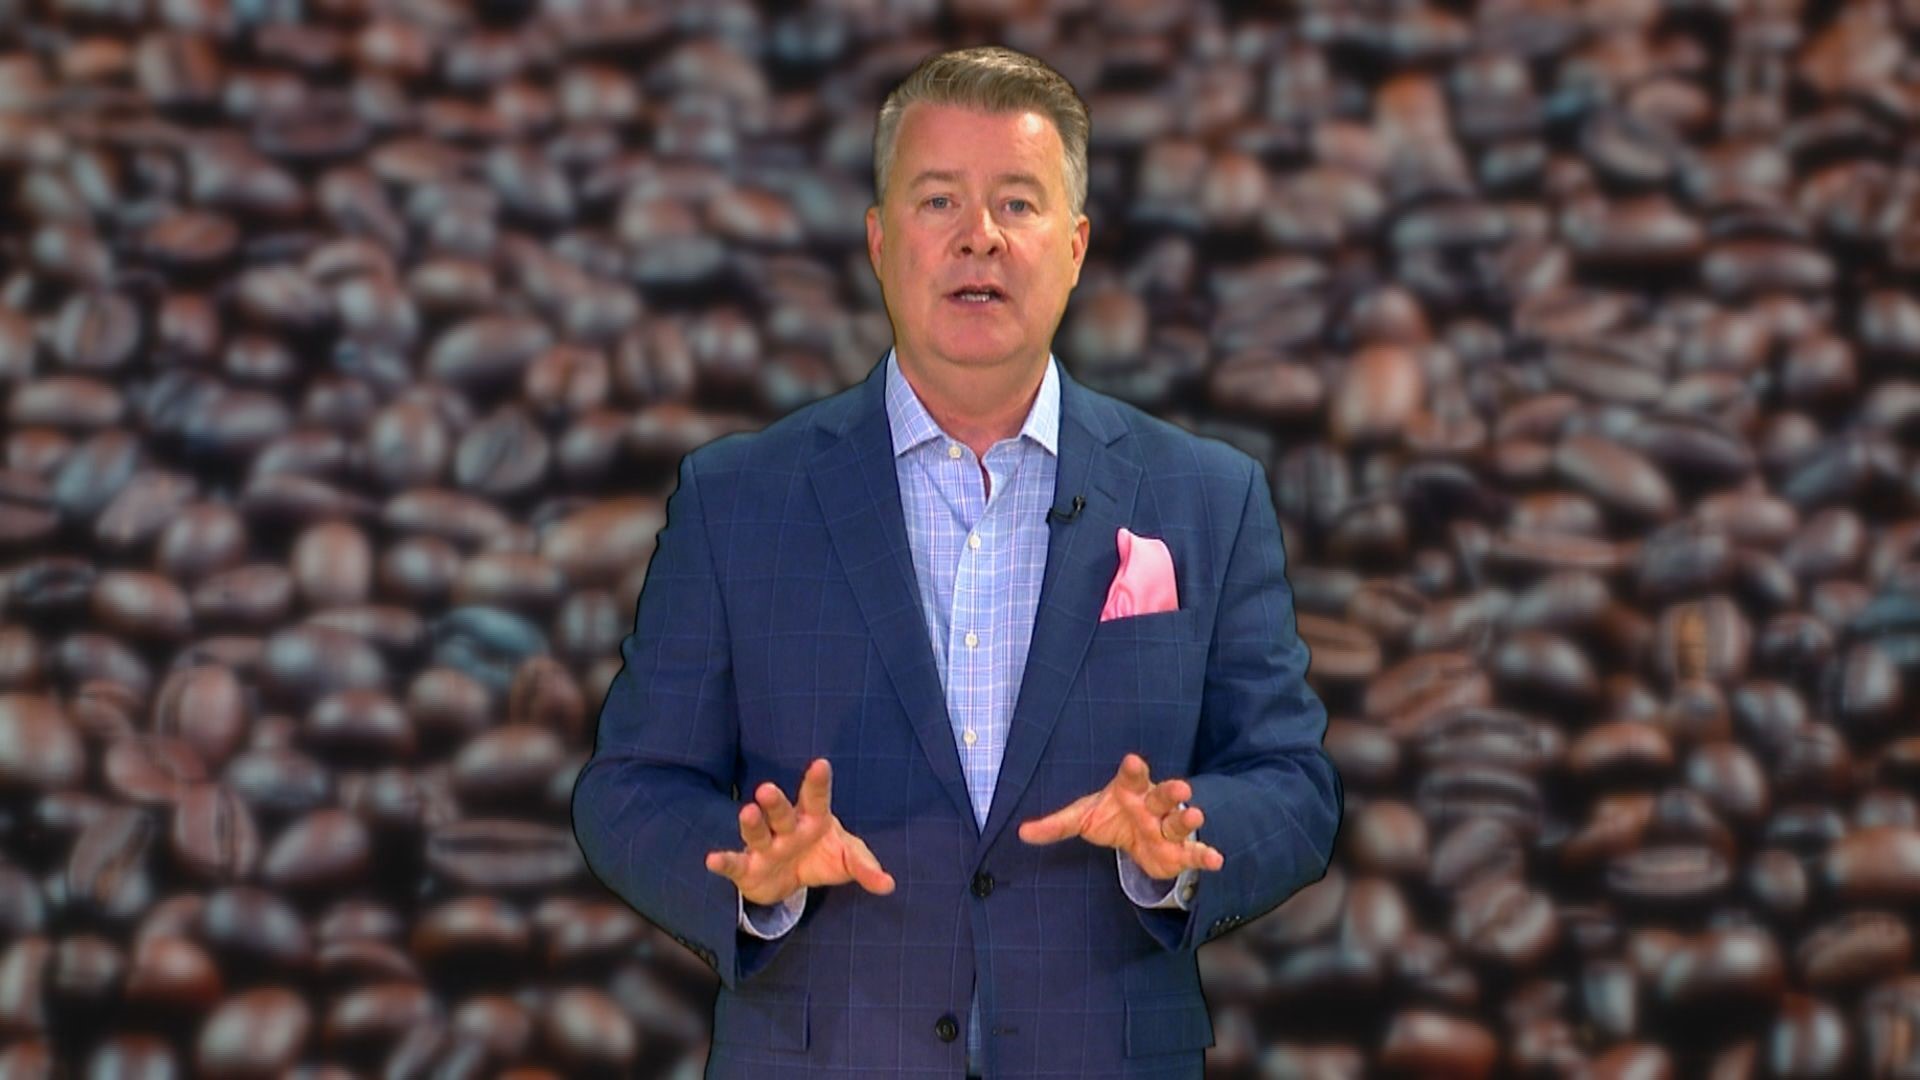 Eric Chilton tells us some additional benefits to our favorite cup of joe.